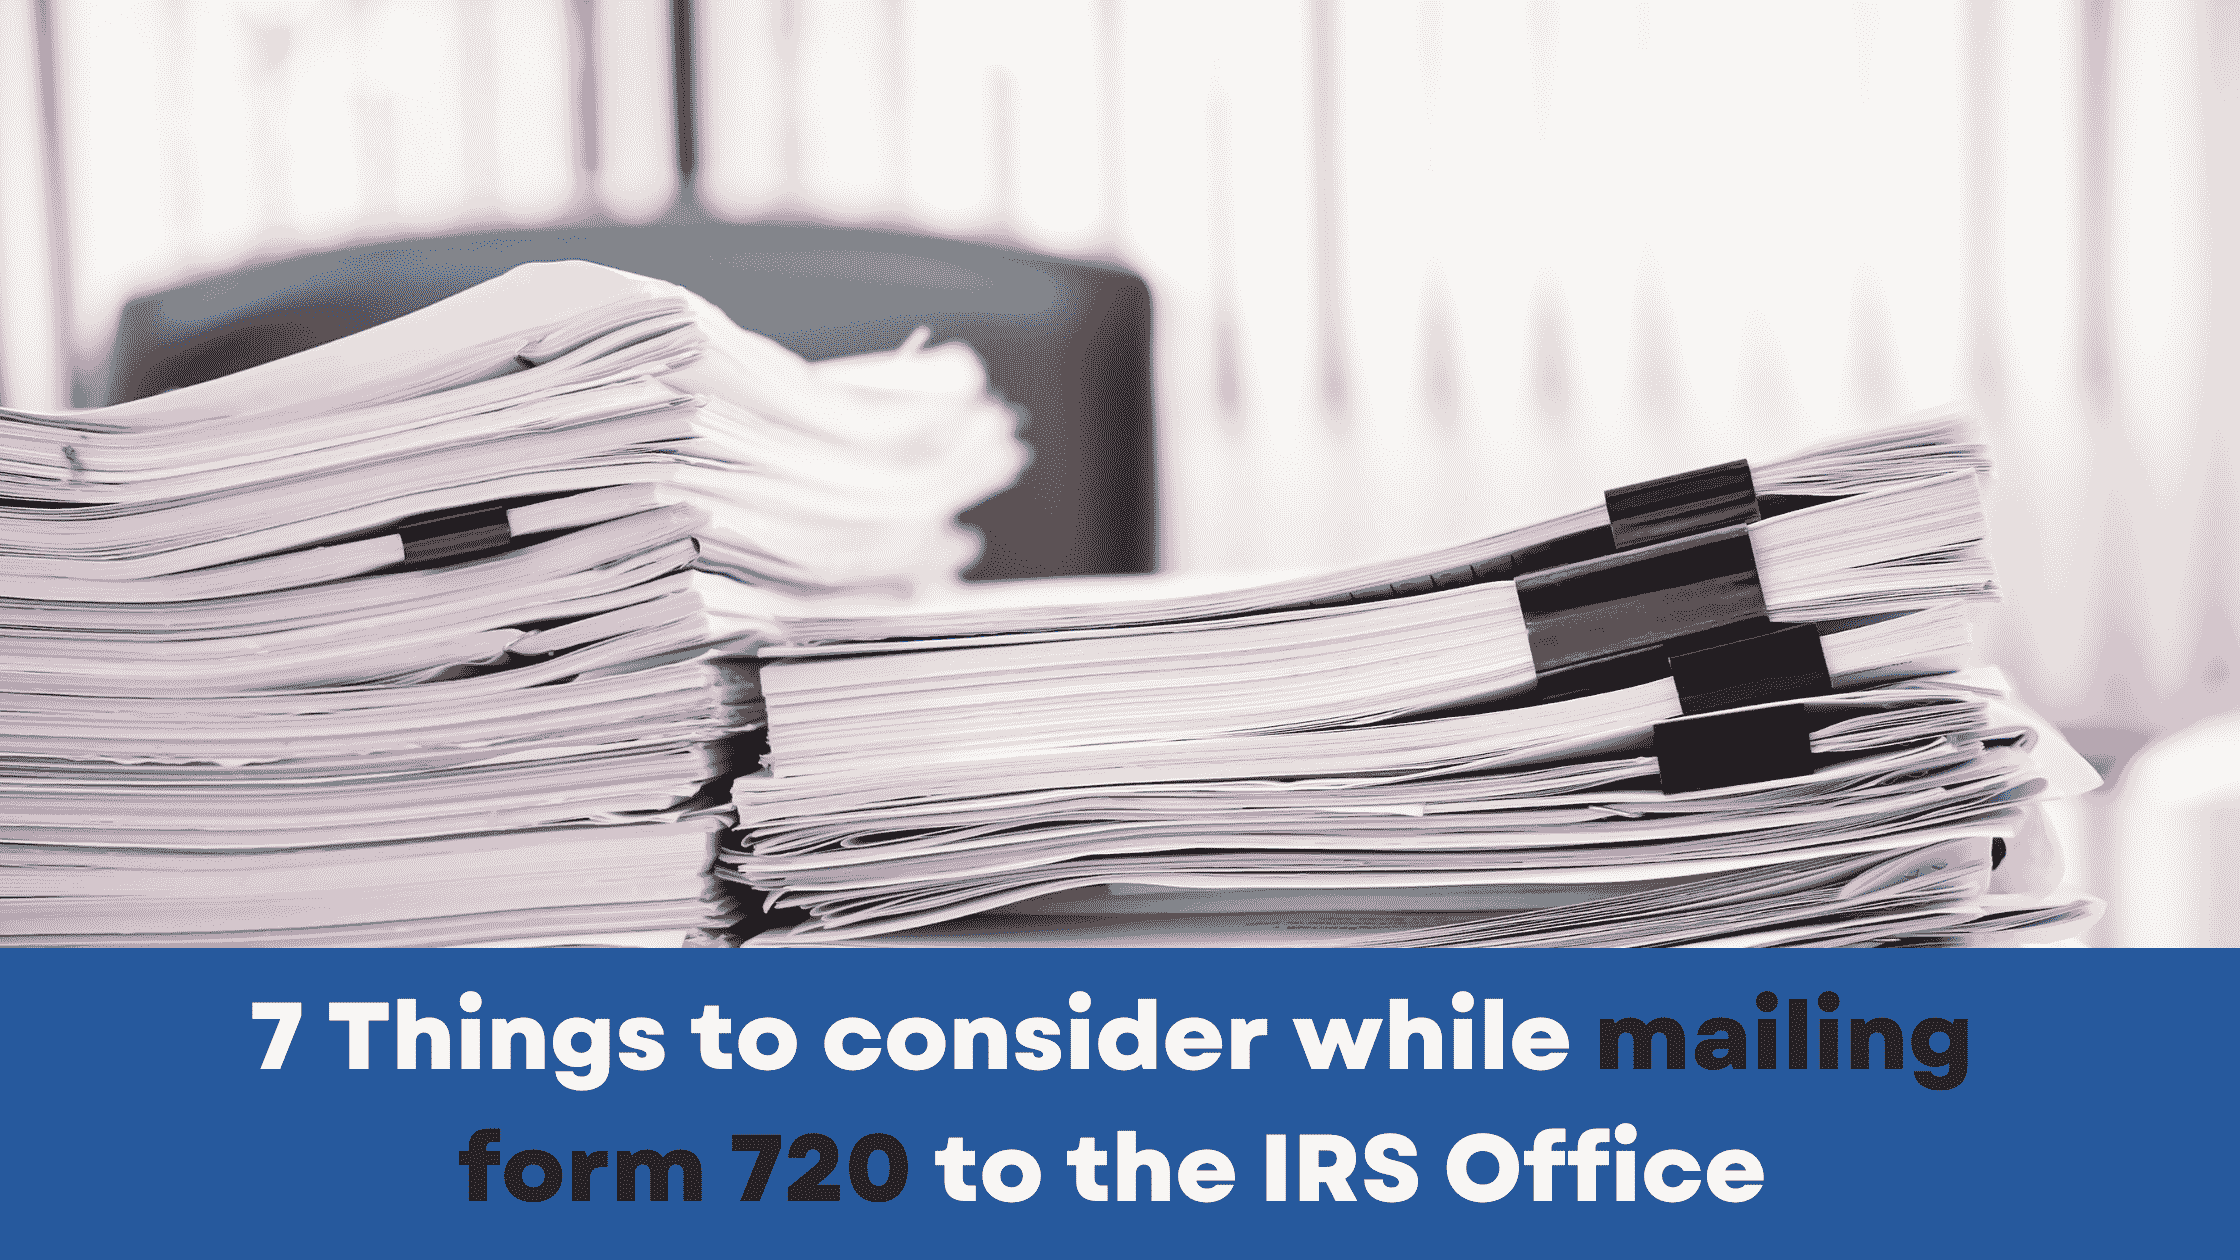 7 Things to consider while mailing Form 720 to the IRS